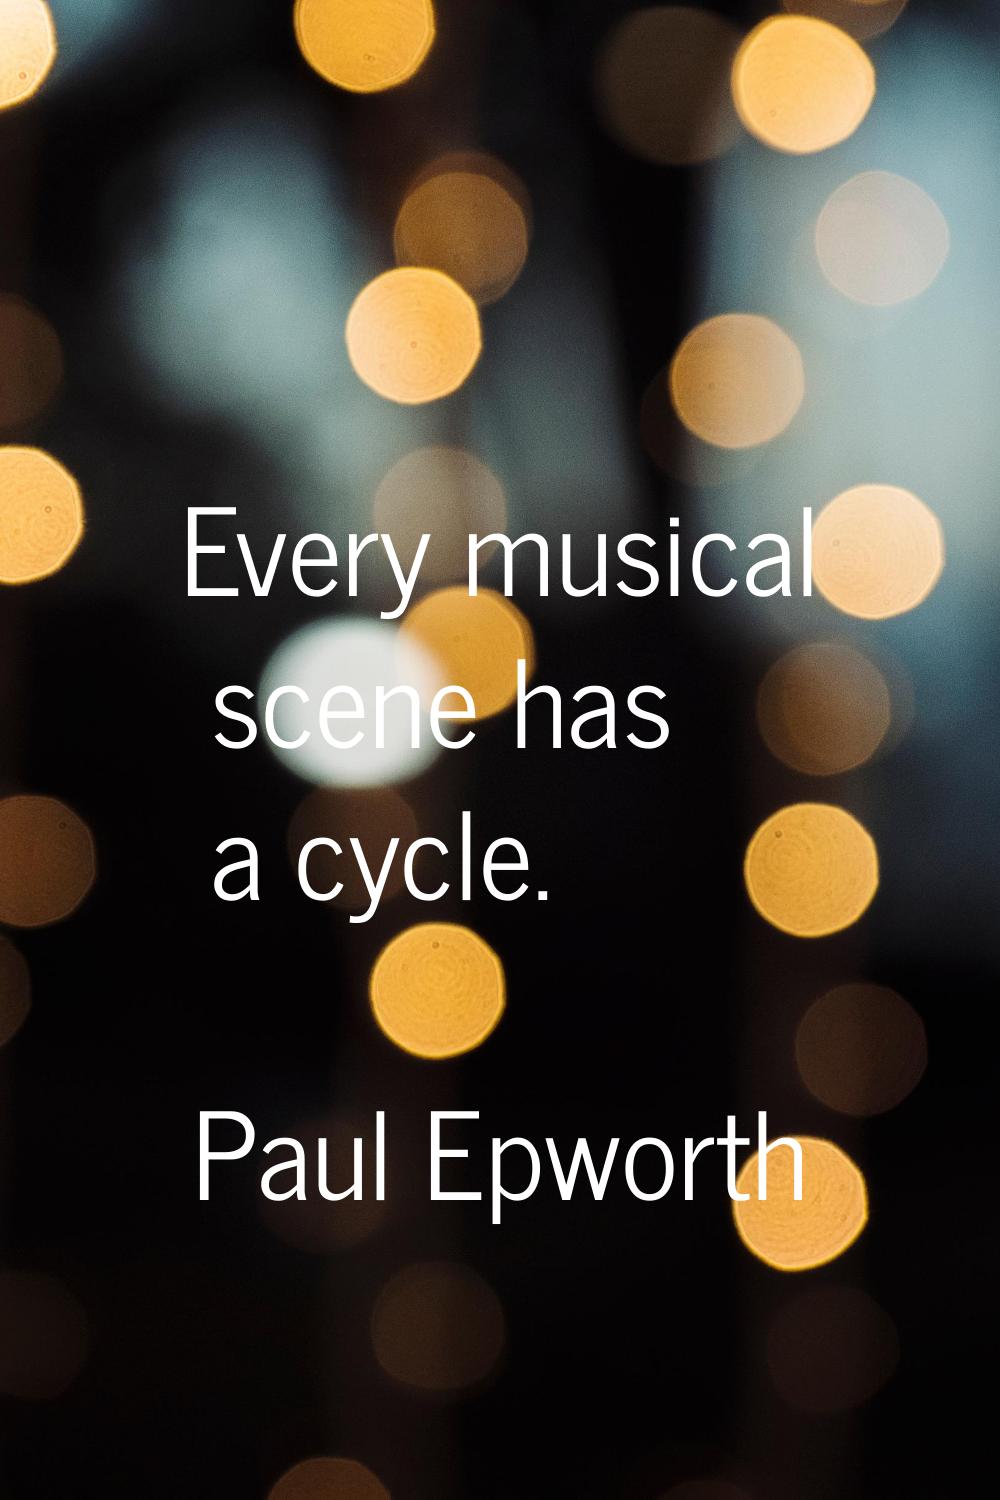 Every musical scene has a cycle.